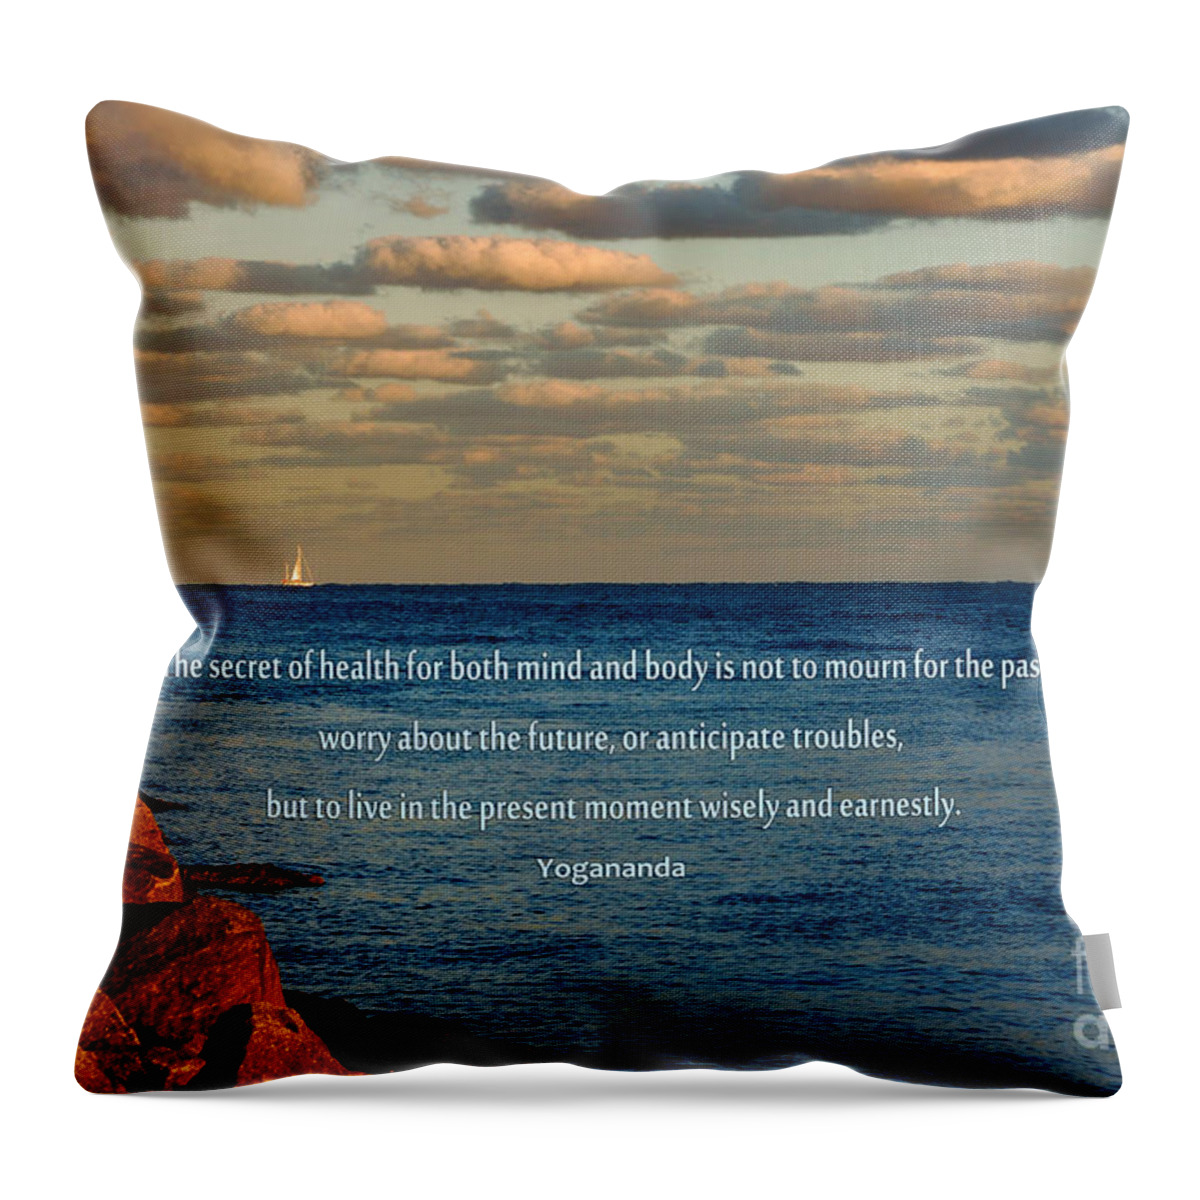 Yogananda Throw Pillow featuring the photograph 15- The Secret Of Health by Joseph Keane